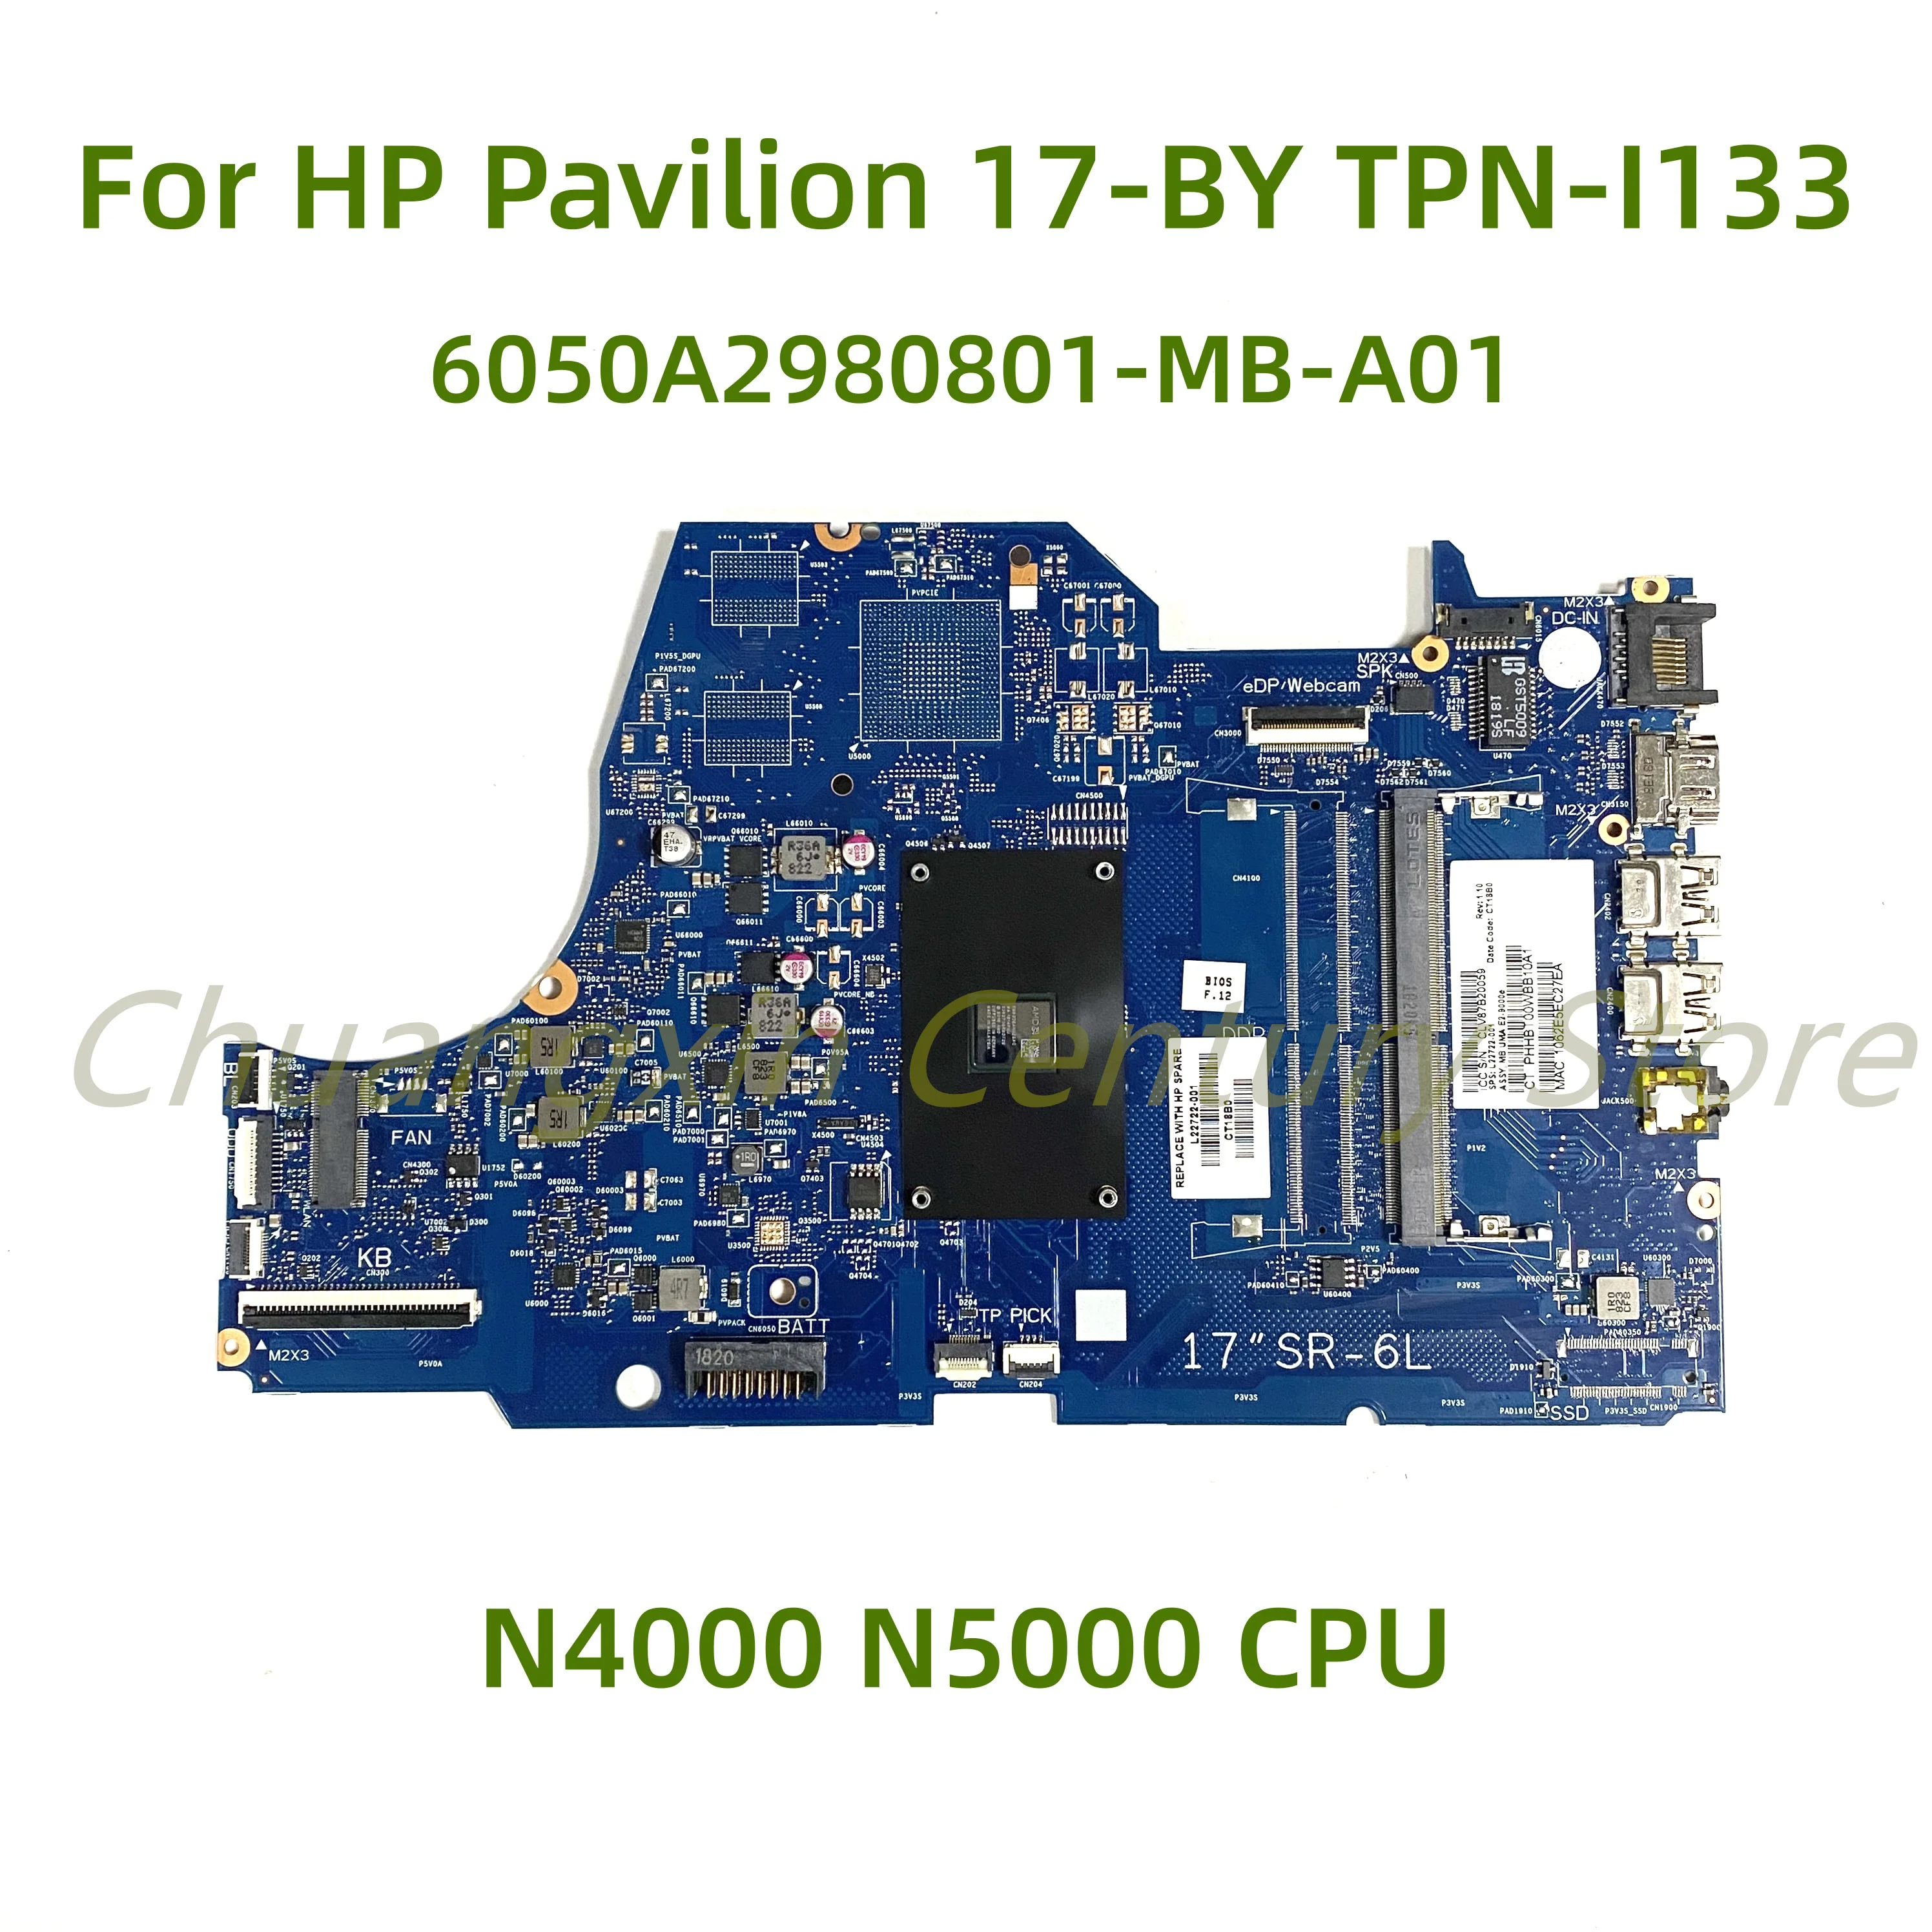 suitable-for-hp-pavilion-17-by-tpn-i133-laptop-motherboard-6050a2980801-mb-a01-a1-with-n4000-n5000-cpu-100-tested-fully-work